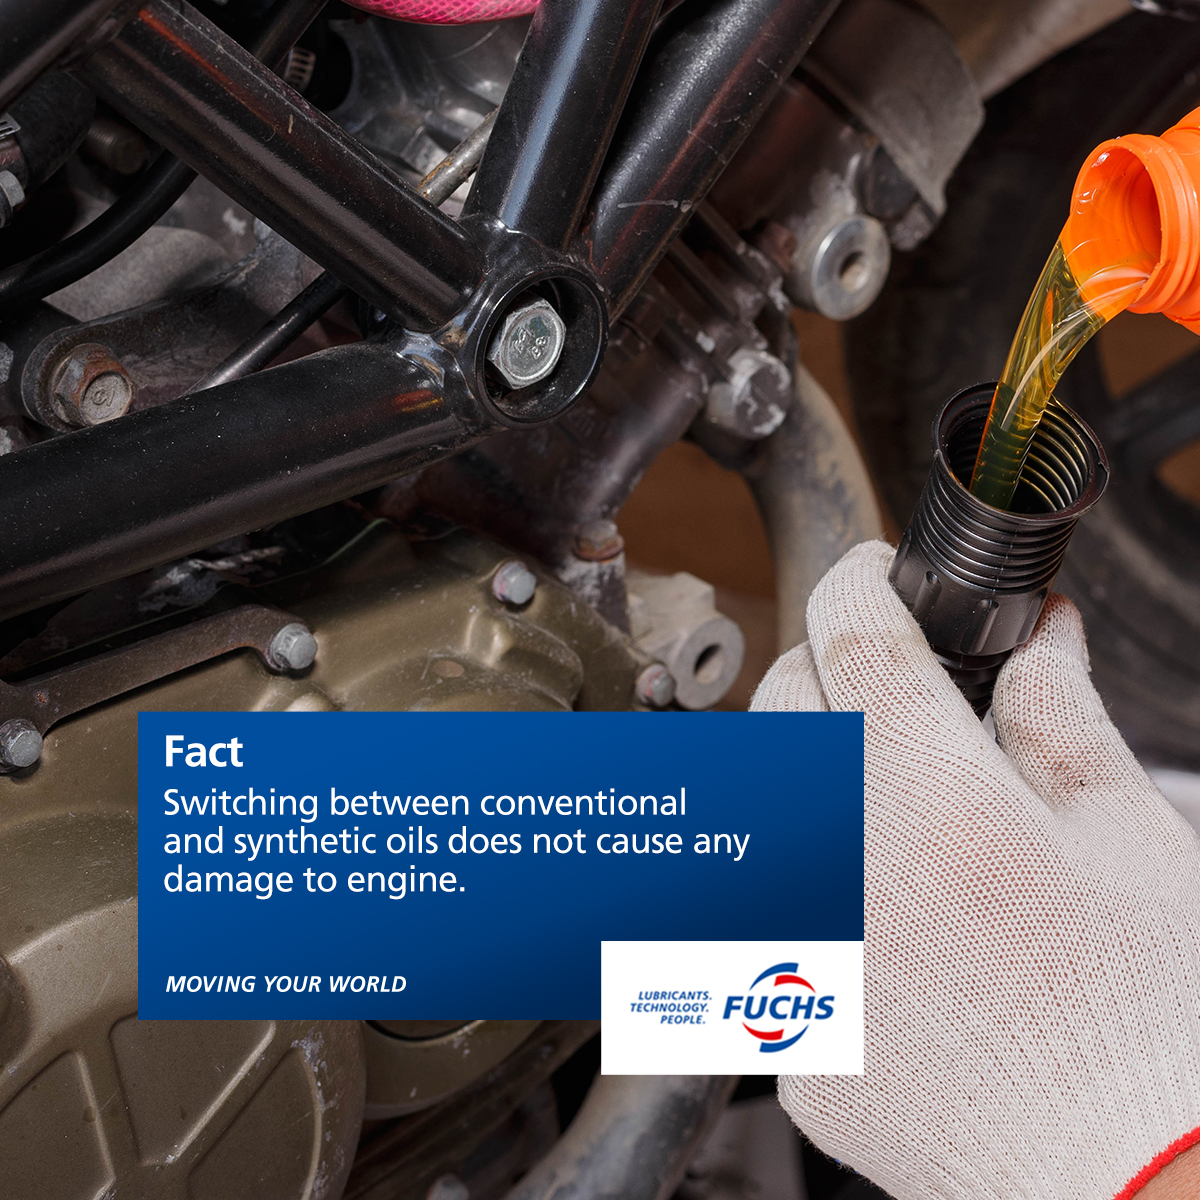 Contrary to popular myths, synthetic oils and conventional oils are compatible with each other. FUCHS Silkolene products offer users performance improvements and have a 100% dedicated motorcycle range. 

#FUCHS #FUCHSIndia #MovingYourWorld #EngineOils #Mythandfacts #syntheticoil